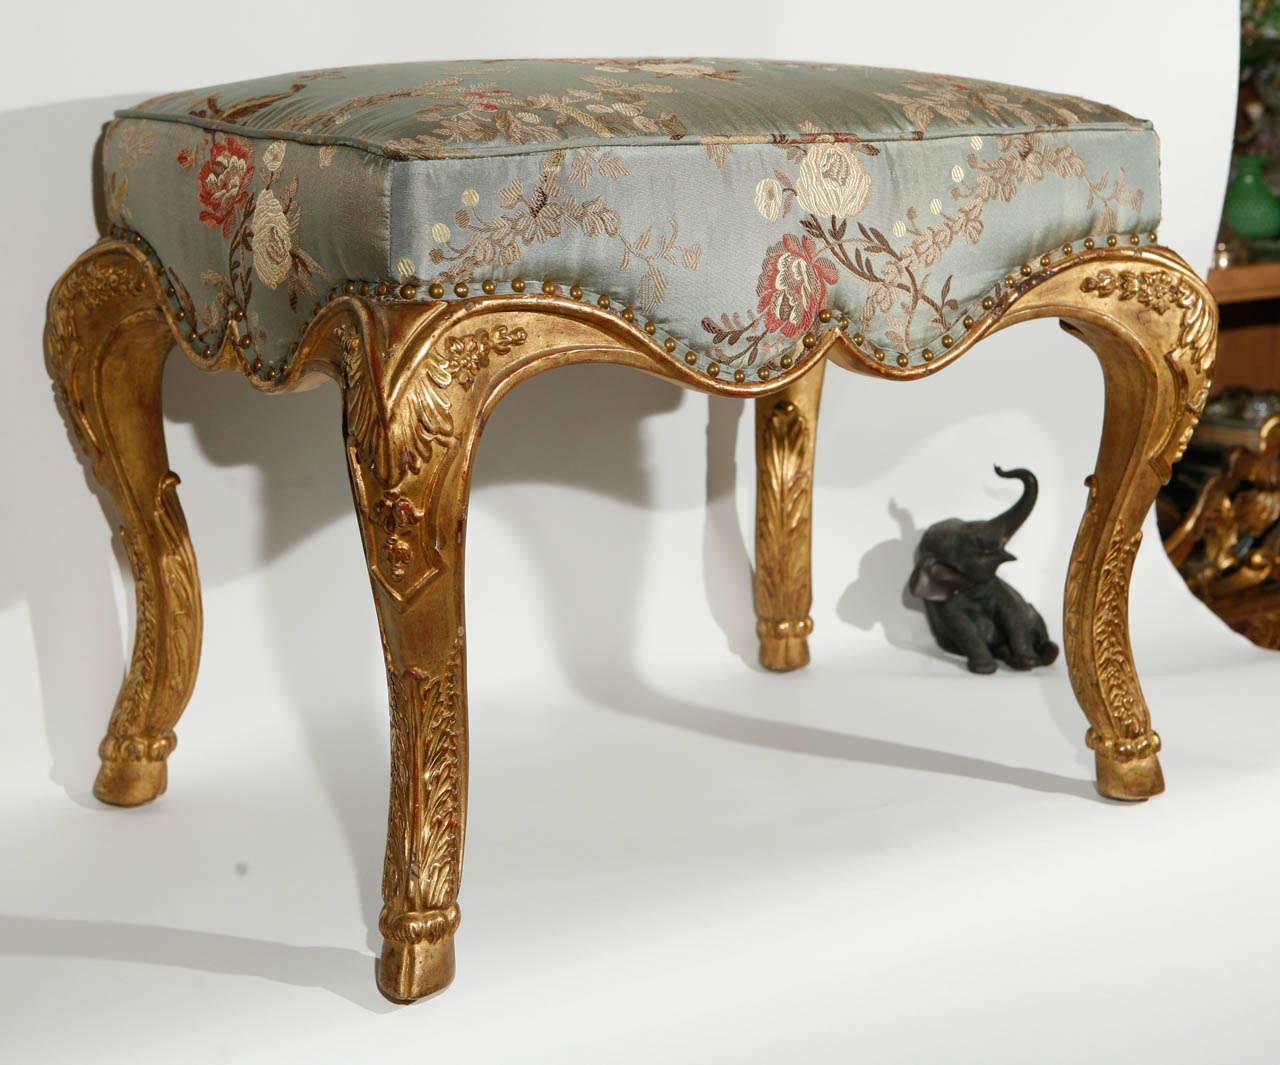 Italian style 22-karat giltwood stool with hoof feet upholstered in silk fabric. This is stool is not antique.